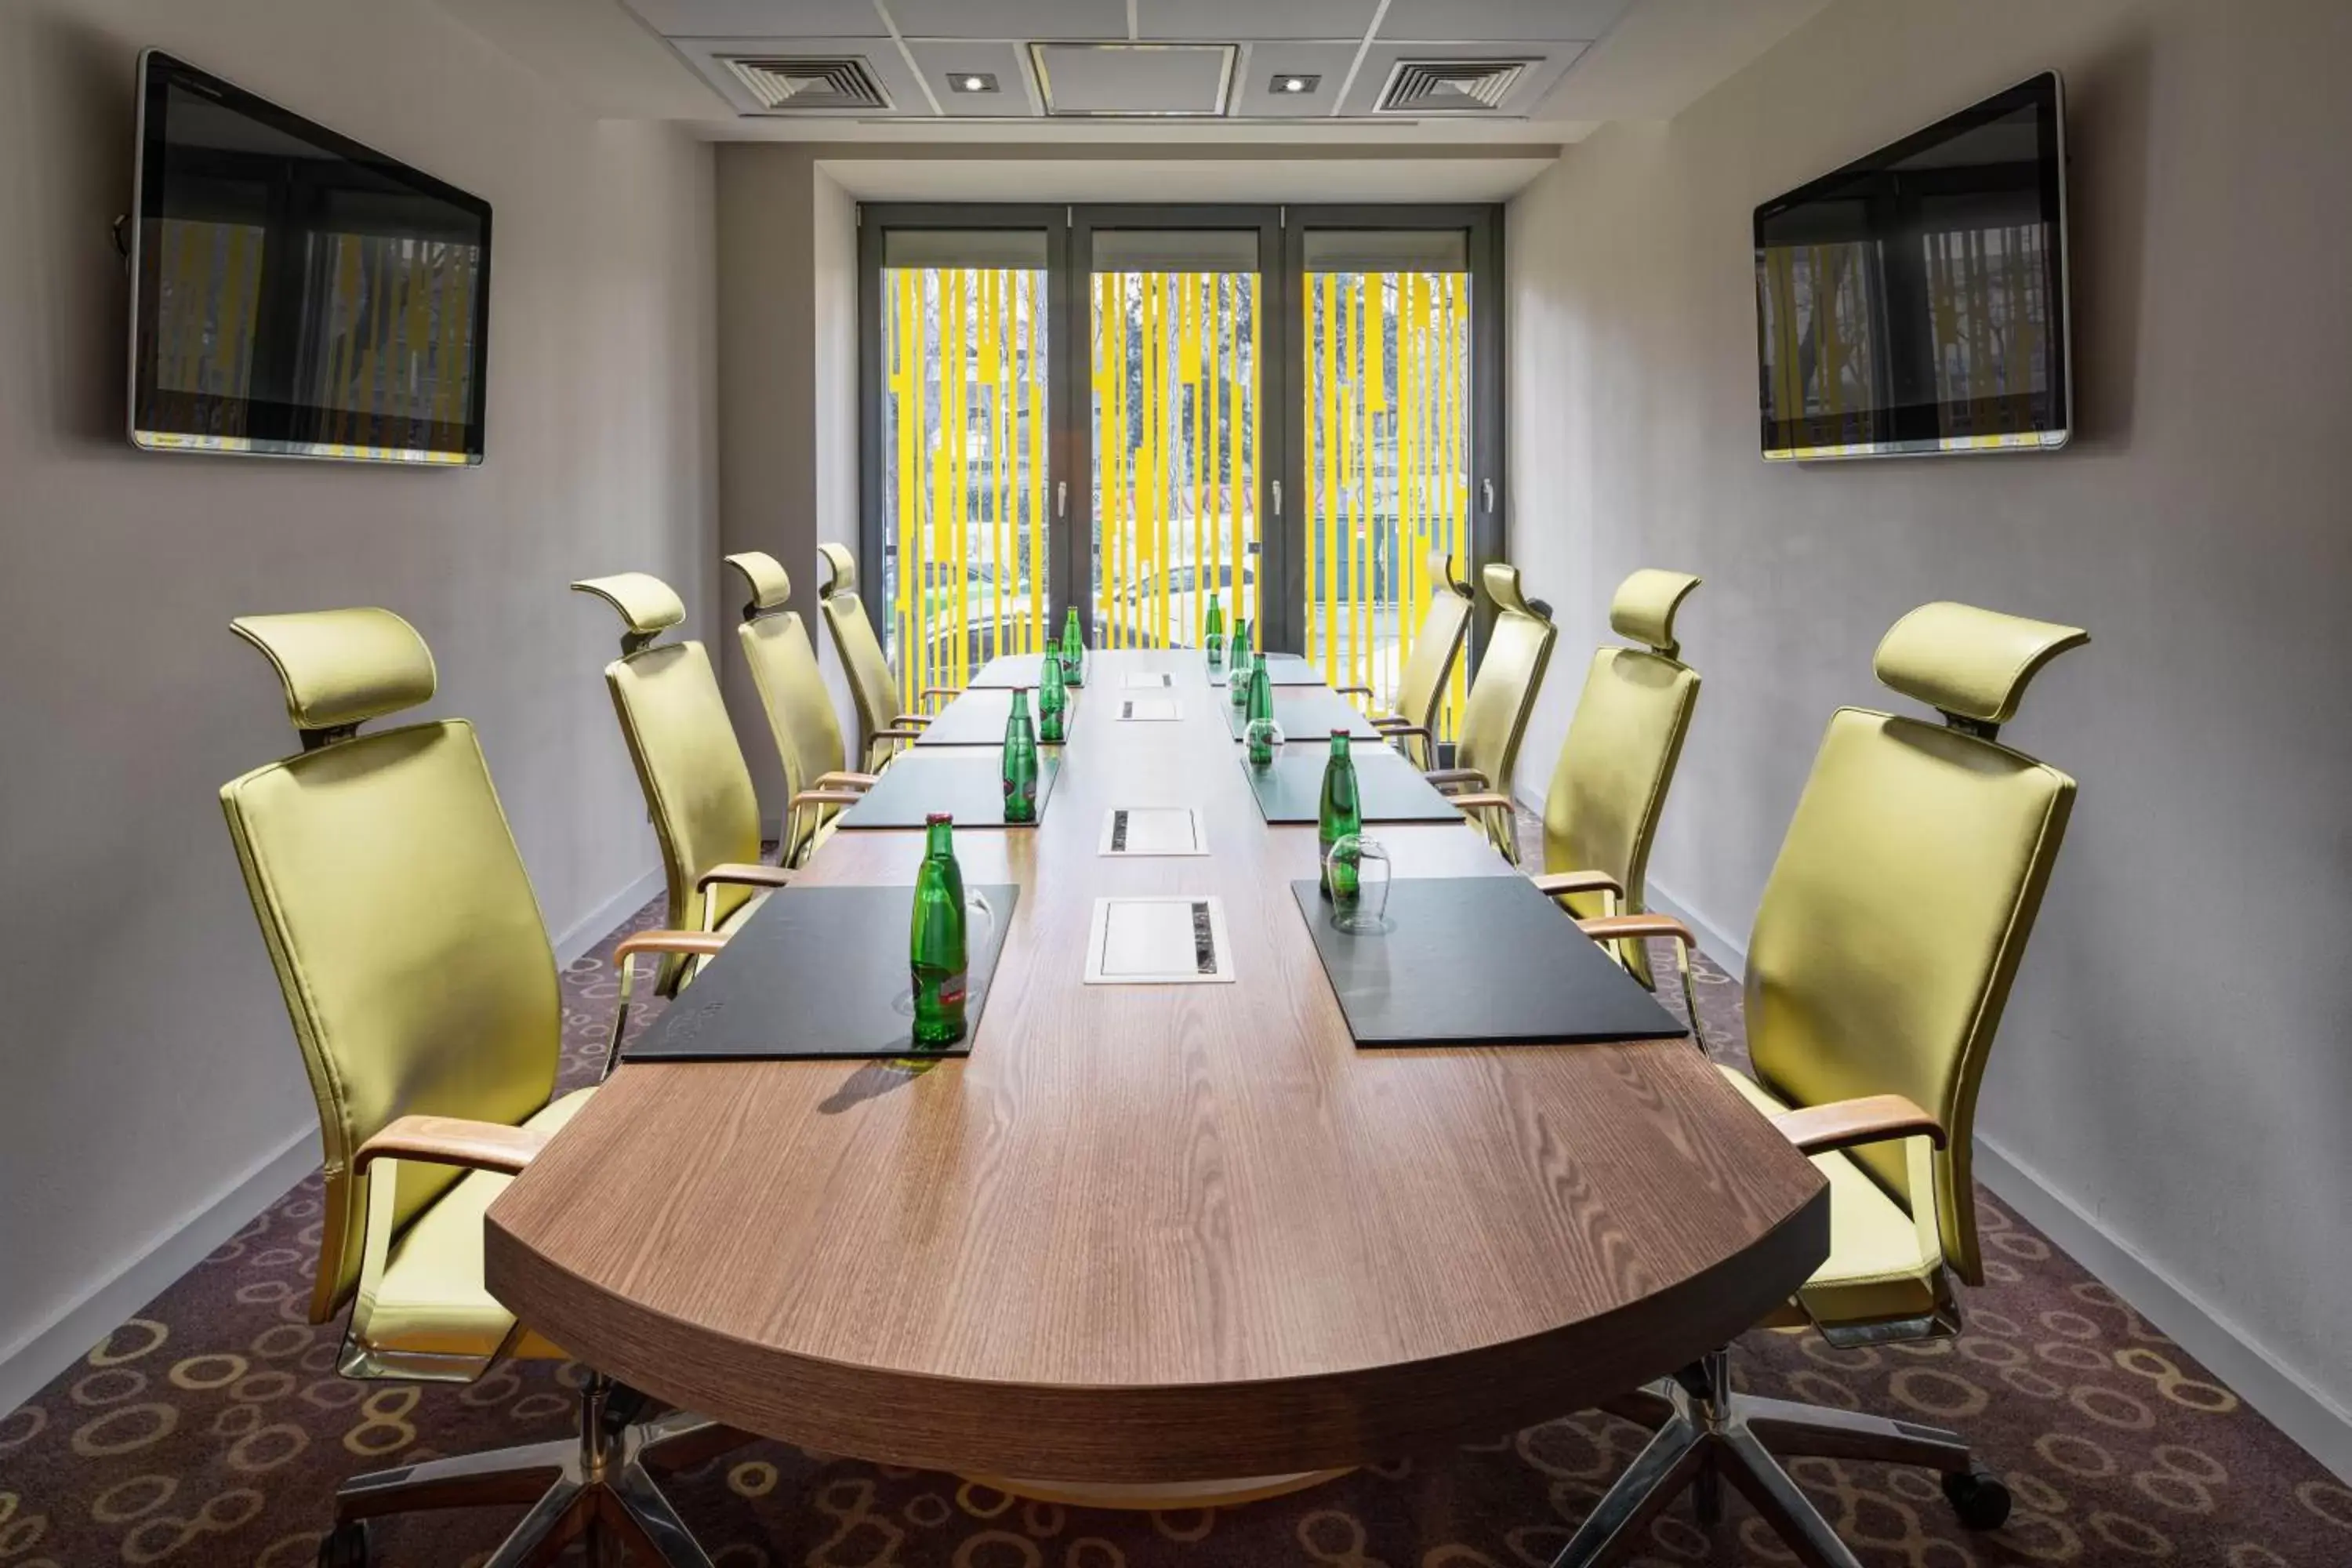 Meeting/conference room in Clarion Congress Hotel Bratislava